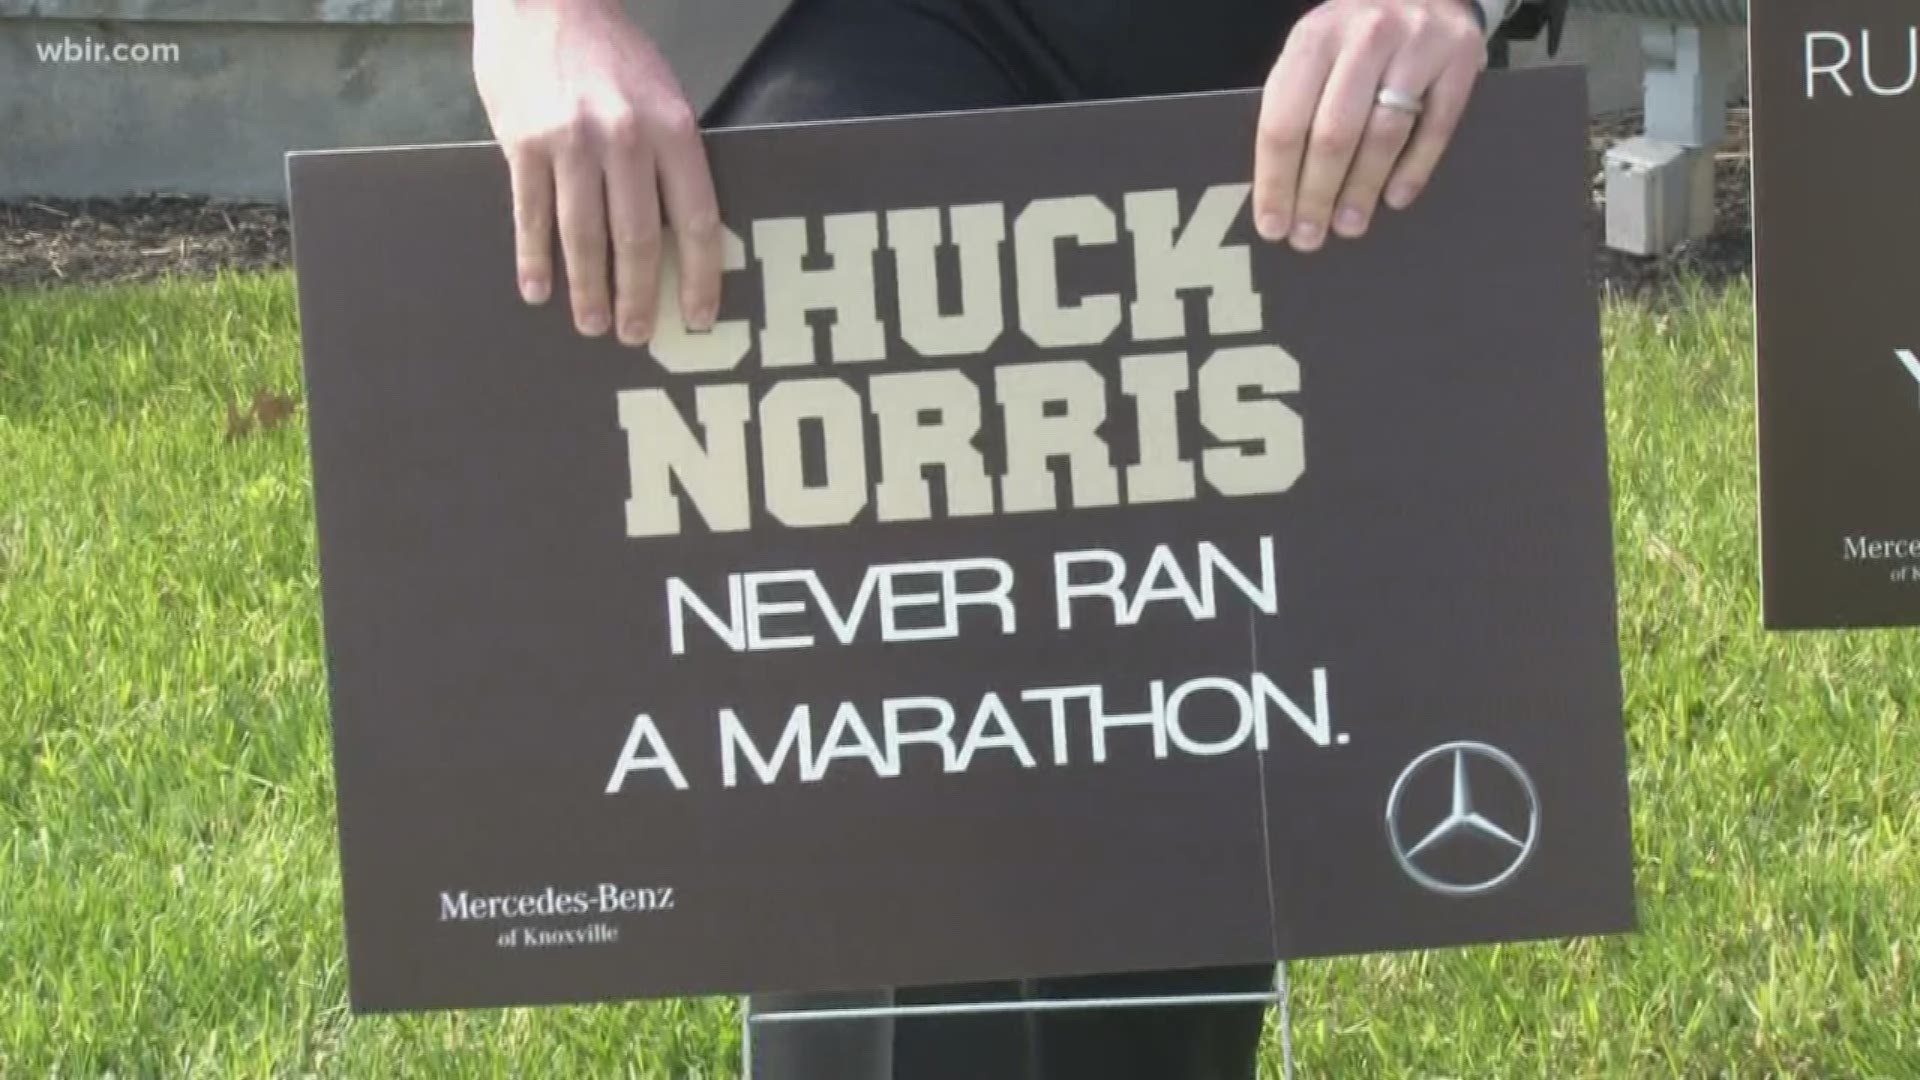 What do Star Wars, actor Chuck Norris and toenails all have in common?If you're running the Covenant Health Knoxville Marathon next weekend, you'll see them all on signs cheering you along the way.